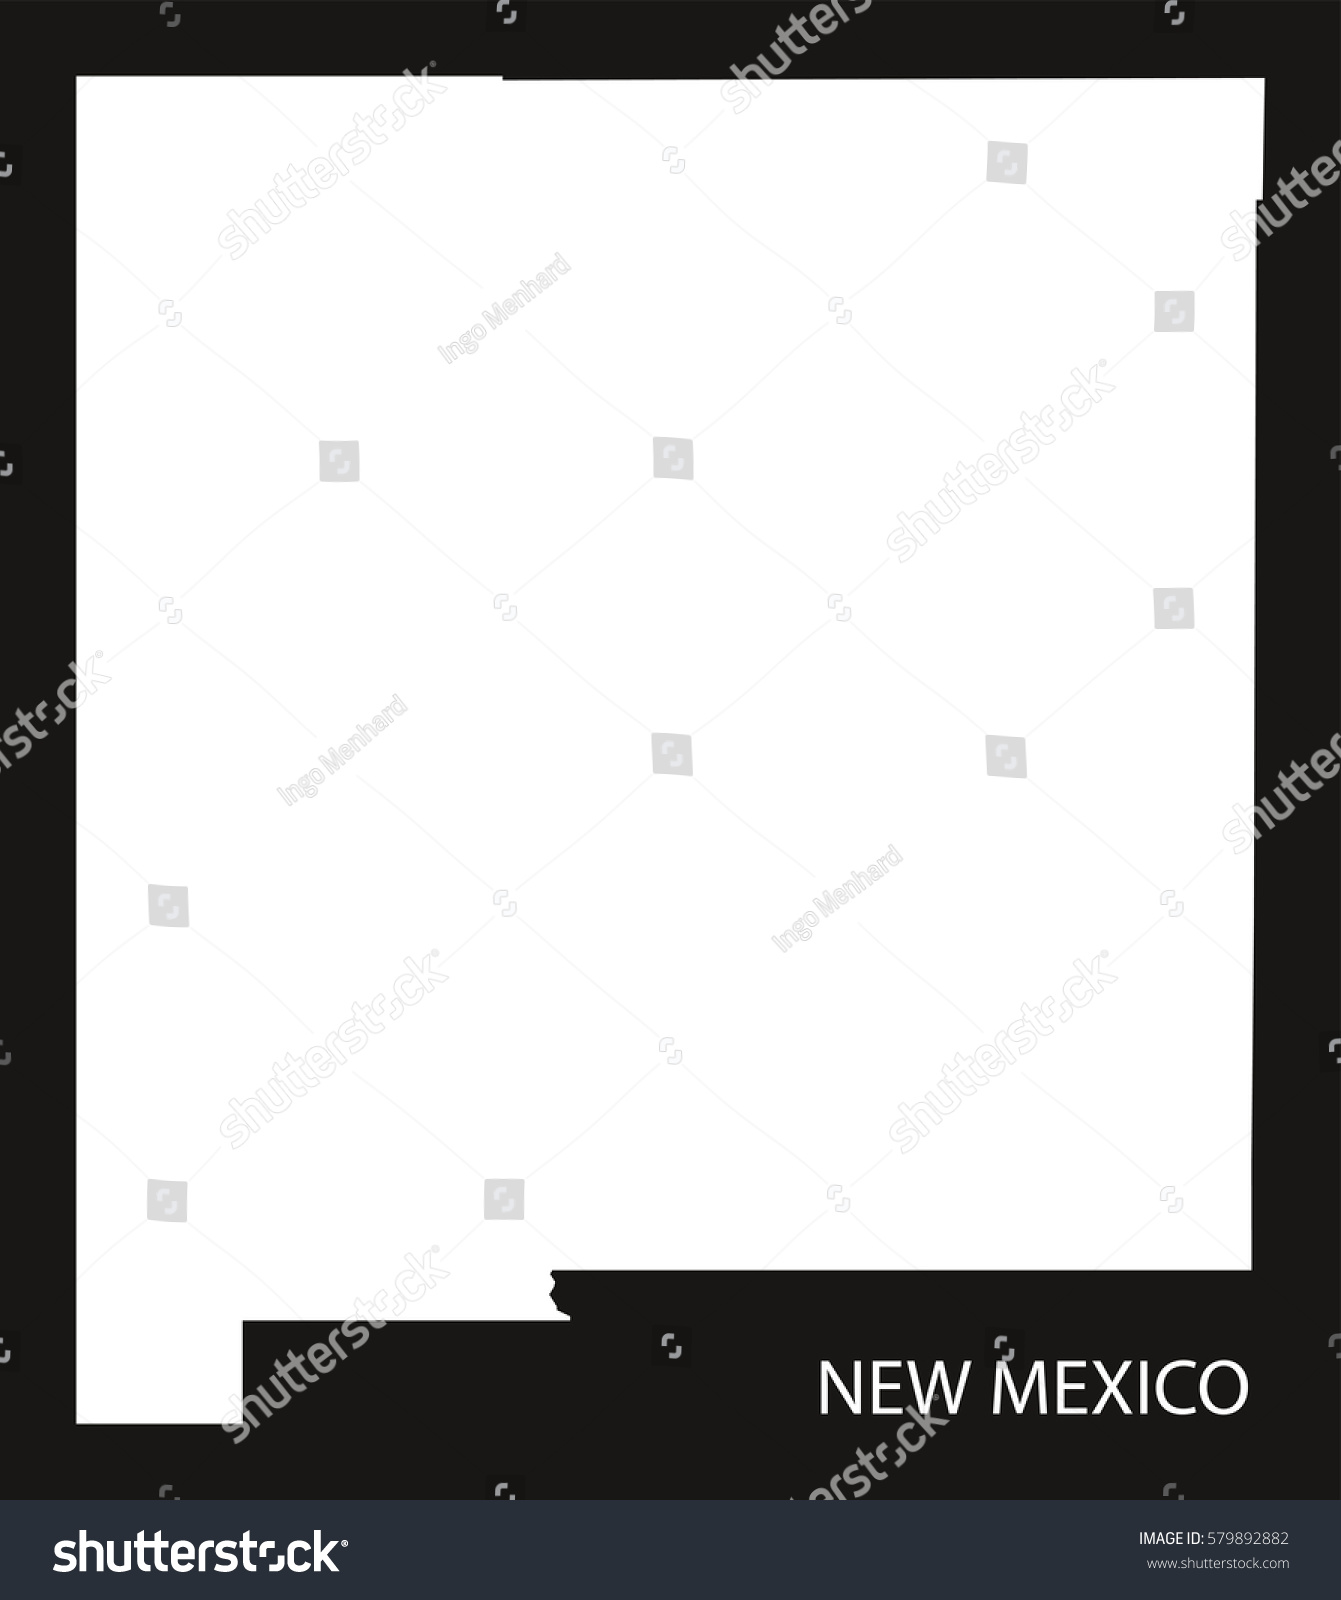 New Mexico Usa Map Black Inverted Silhouette Royalty Free Stock Vector 579892882 6305